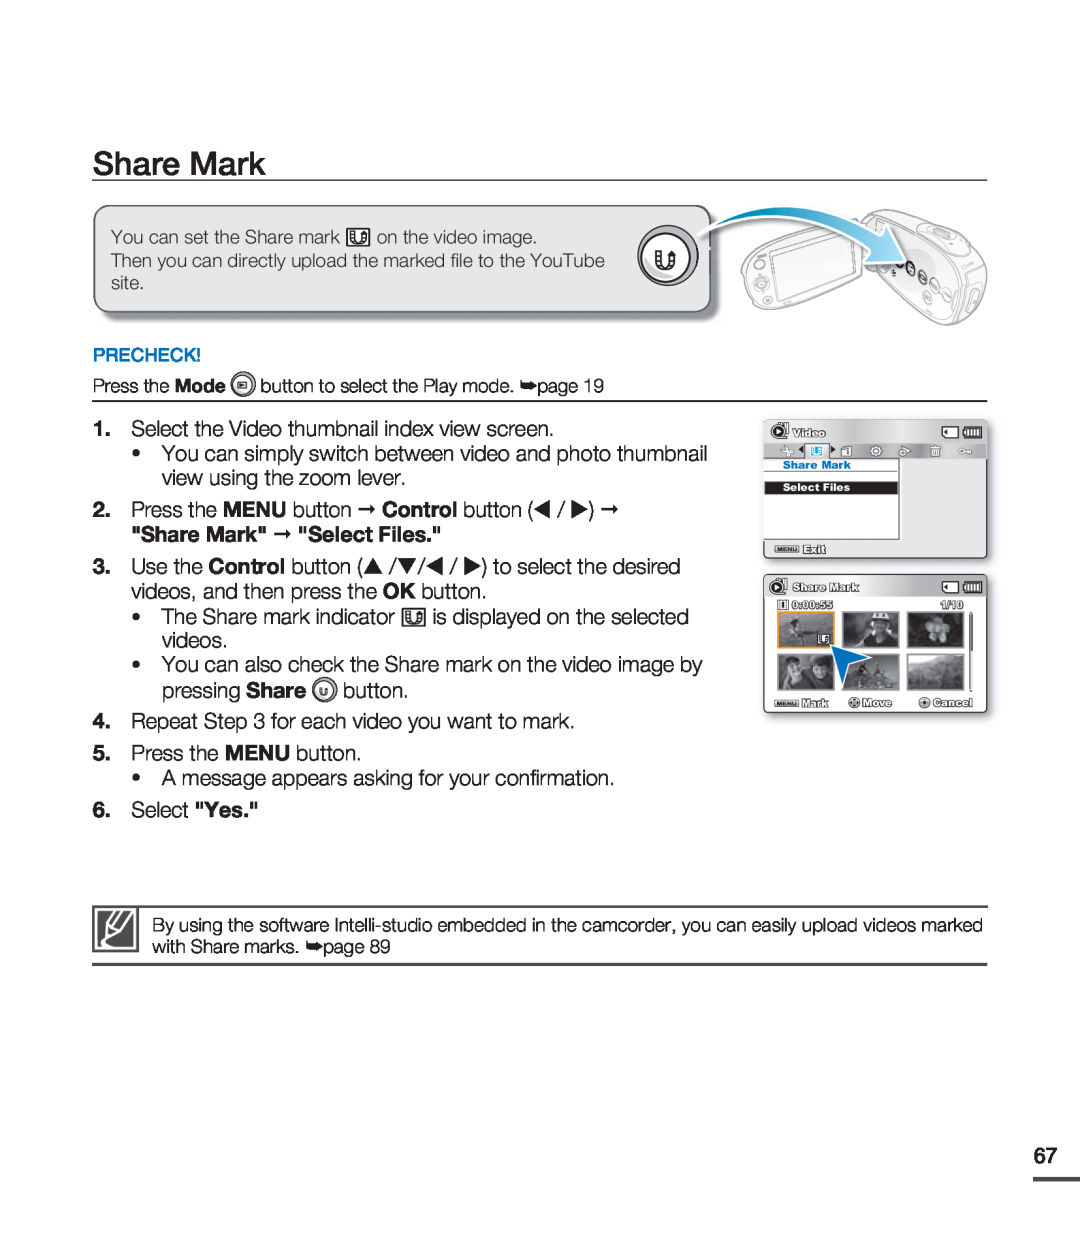 Samsung SMX-C24LP/XIL Share Mark, The Share mark indicator is displayed on the selected videos, Press the MENU button 